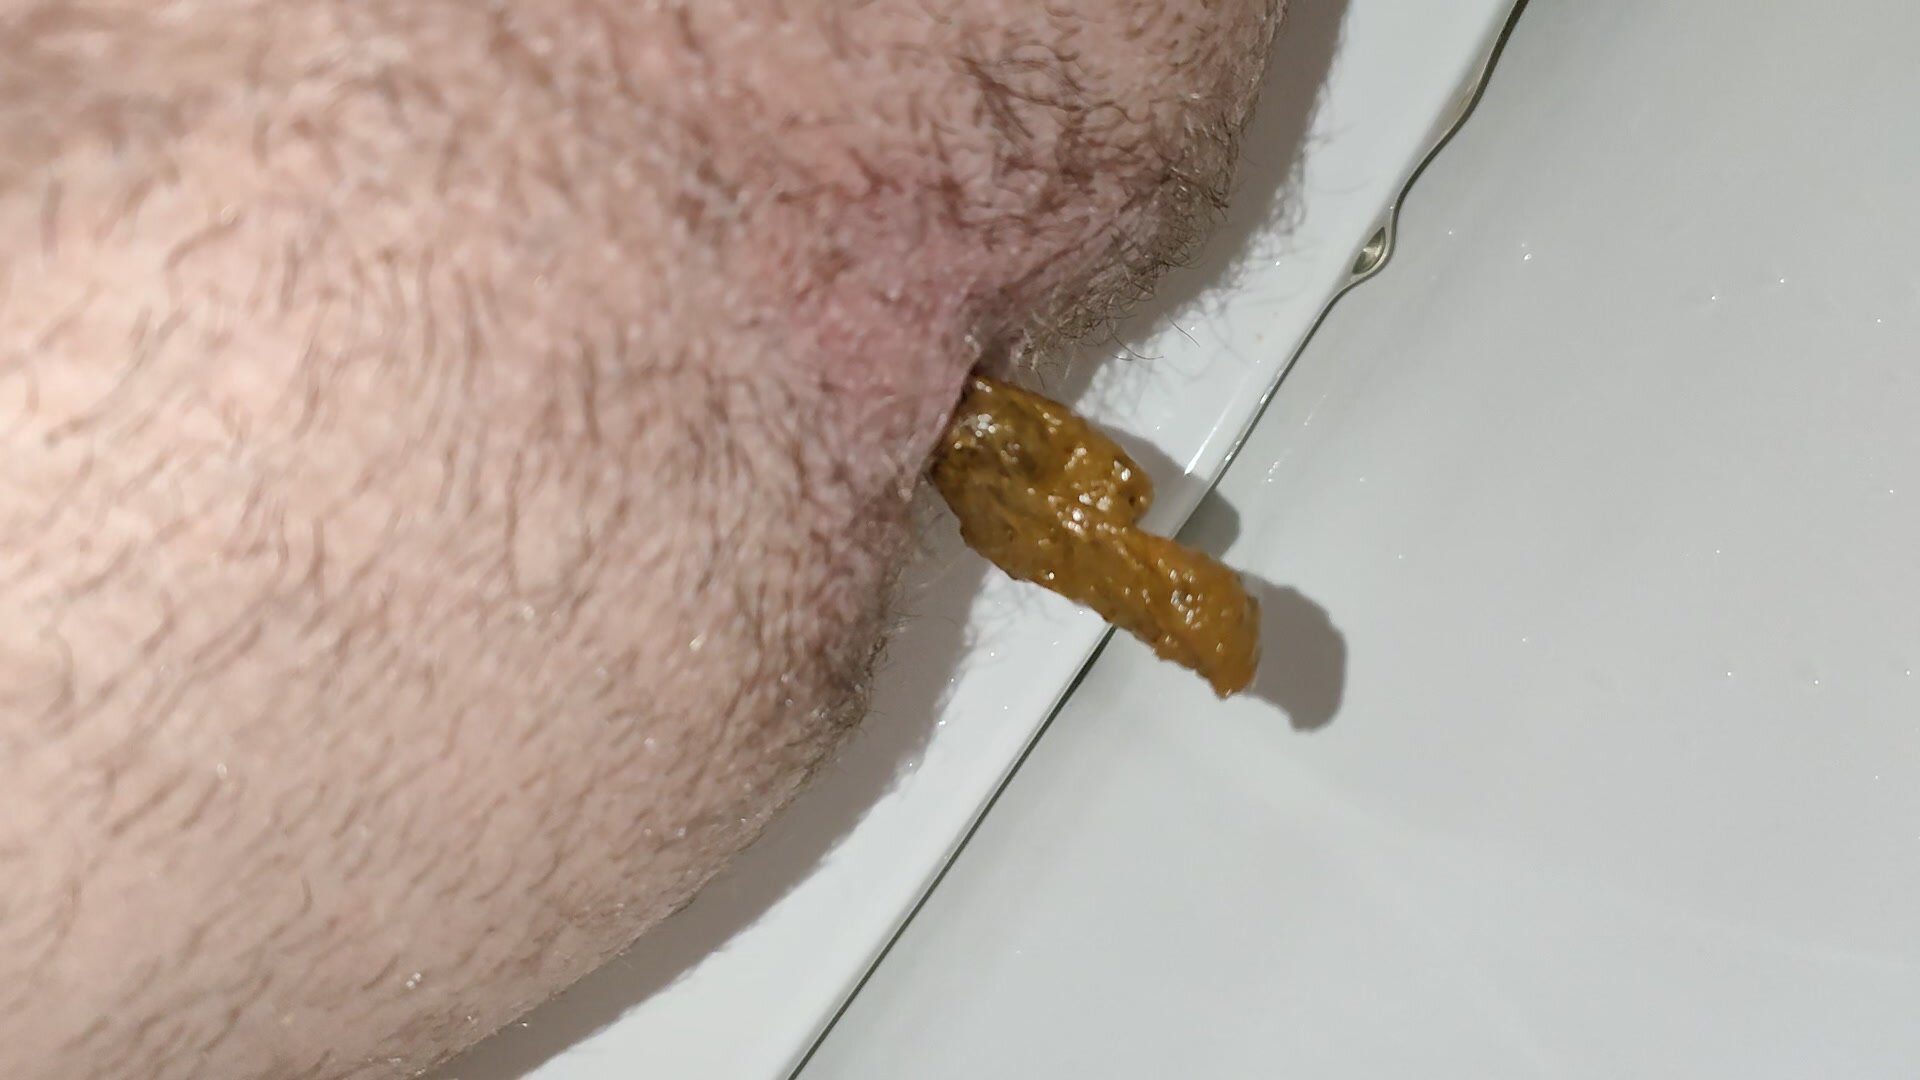 Hairy ass taking a soft shit